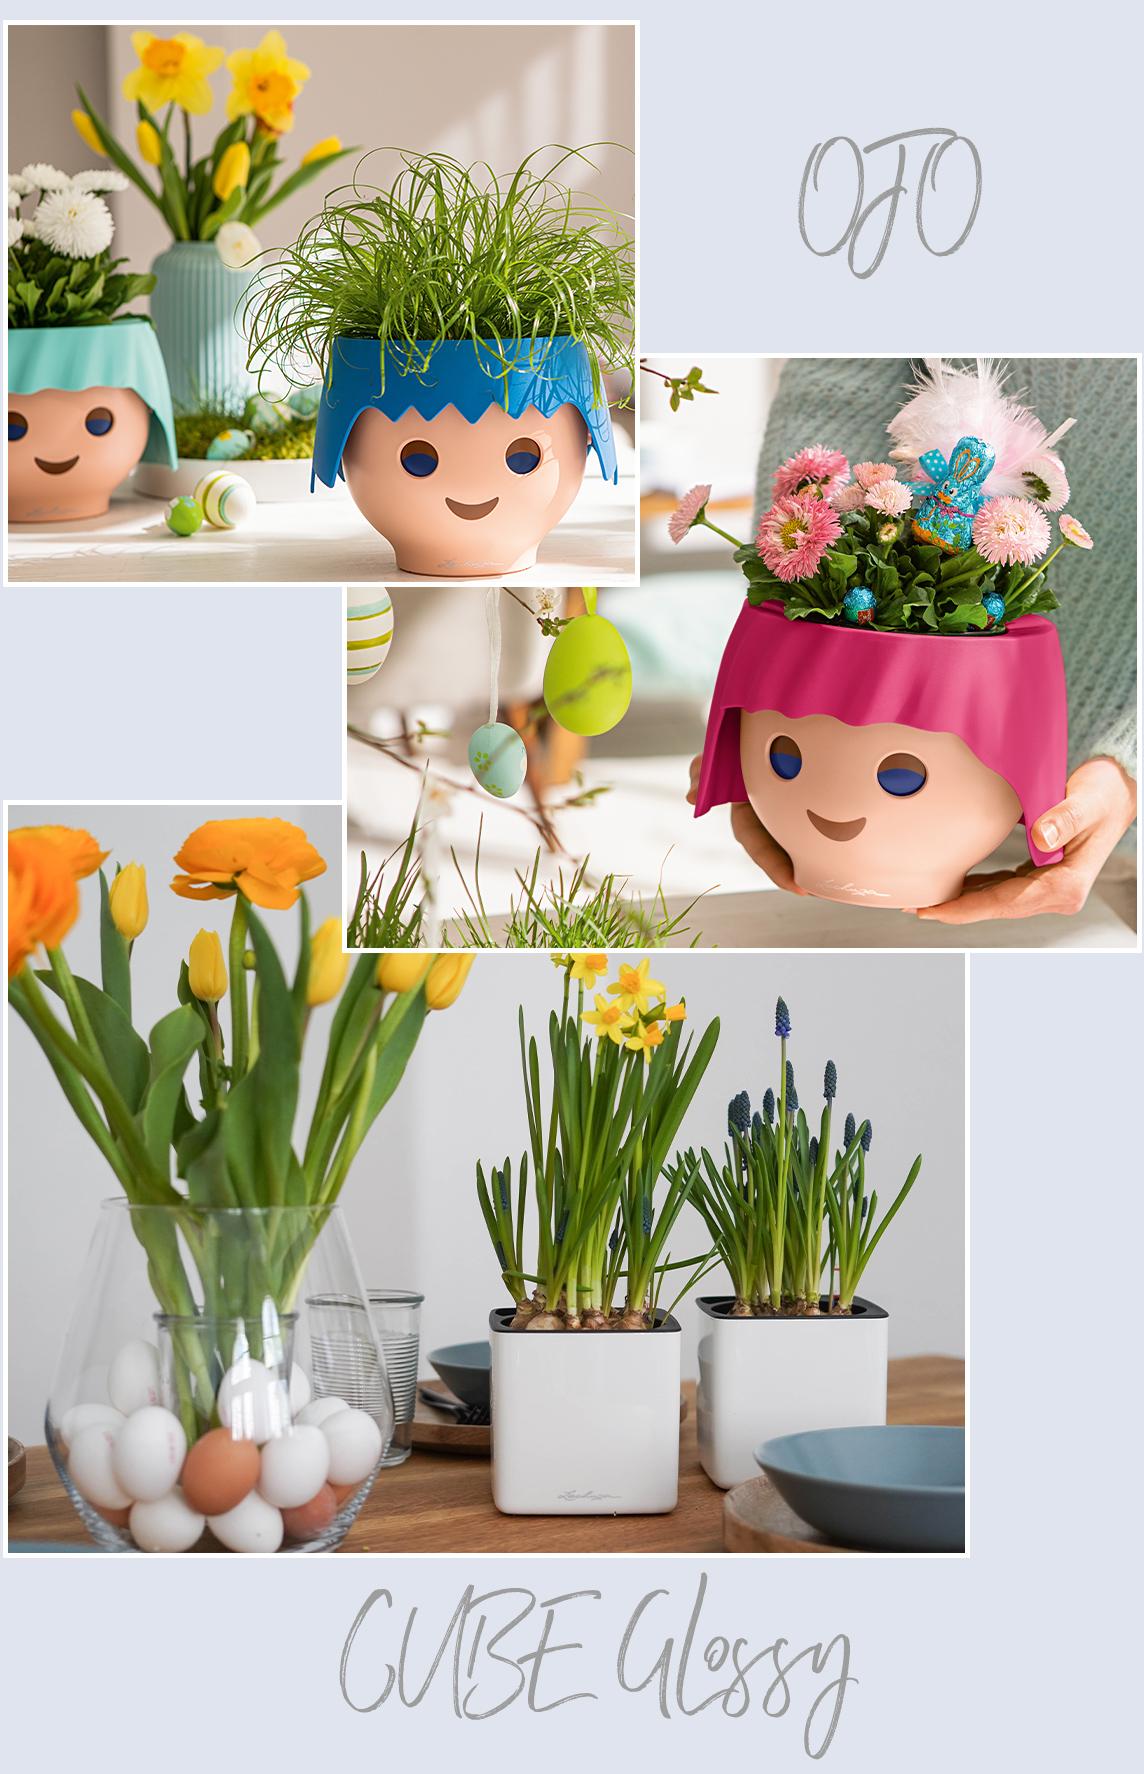 'LECHUZA flower pots in the shape of Playmobil heads